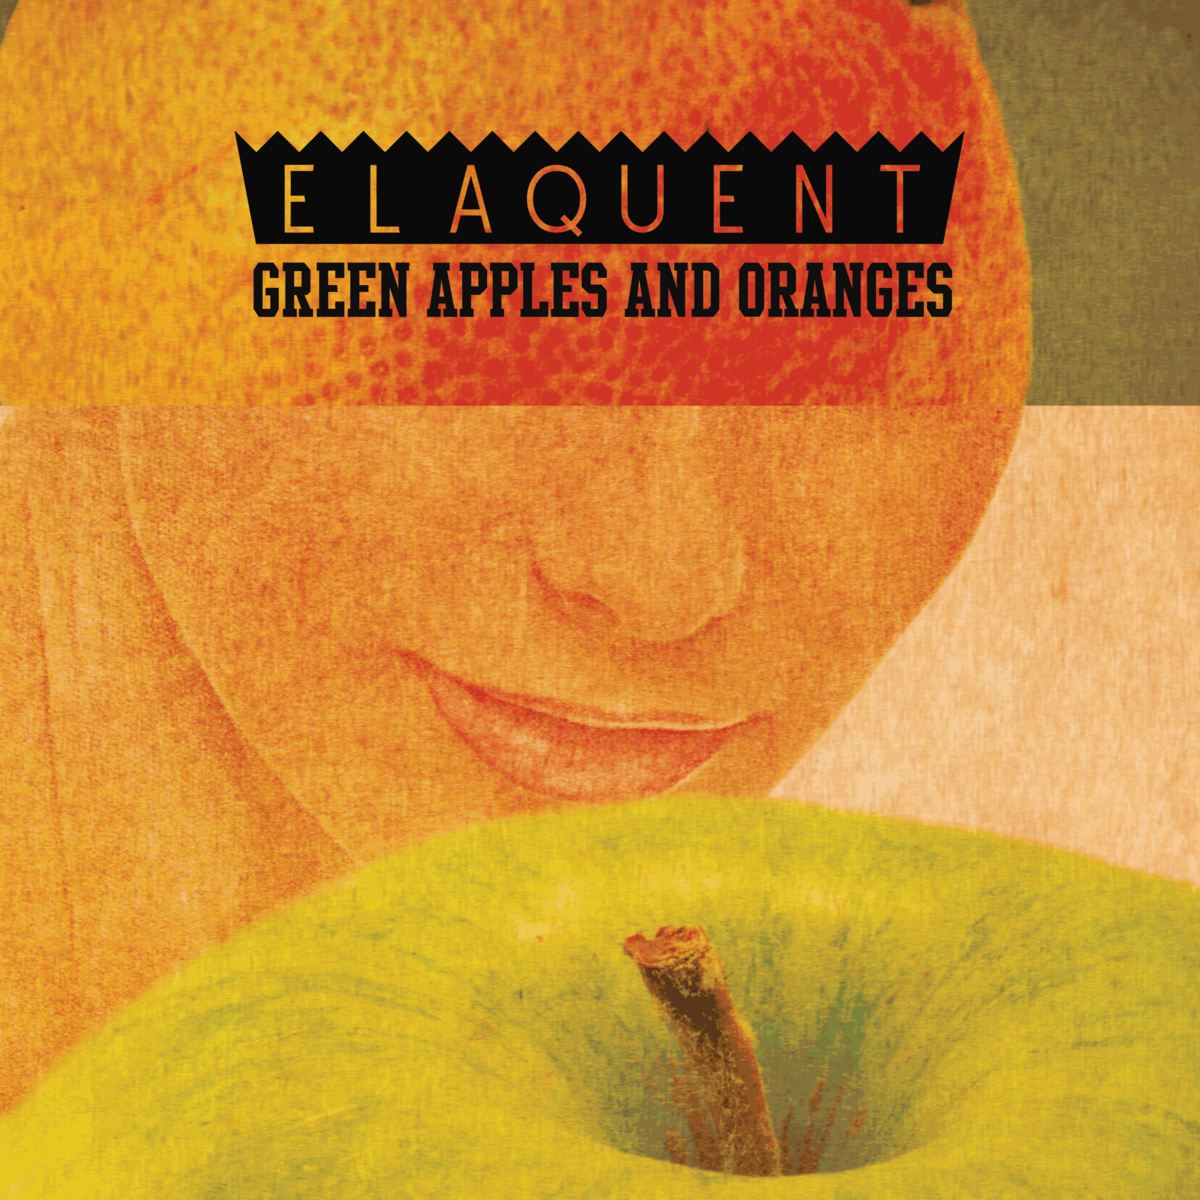 Elaquent "Green Apples and Oranges" Release